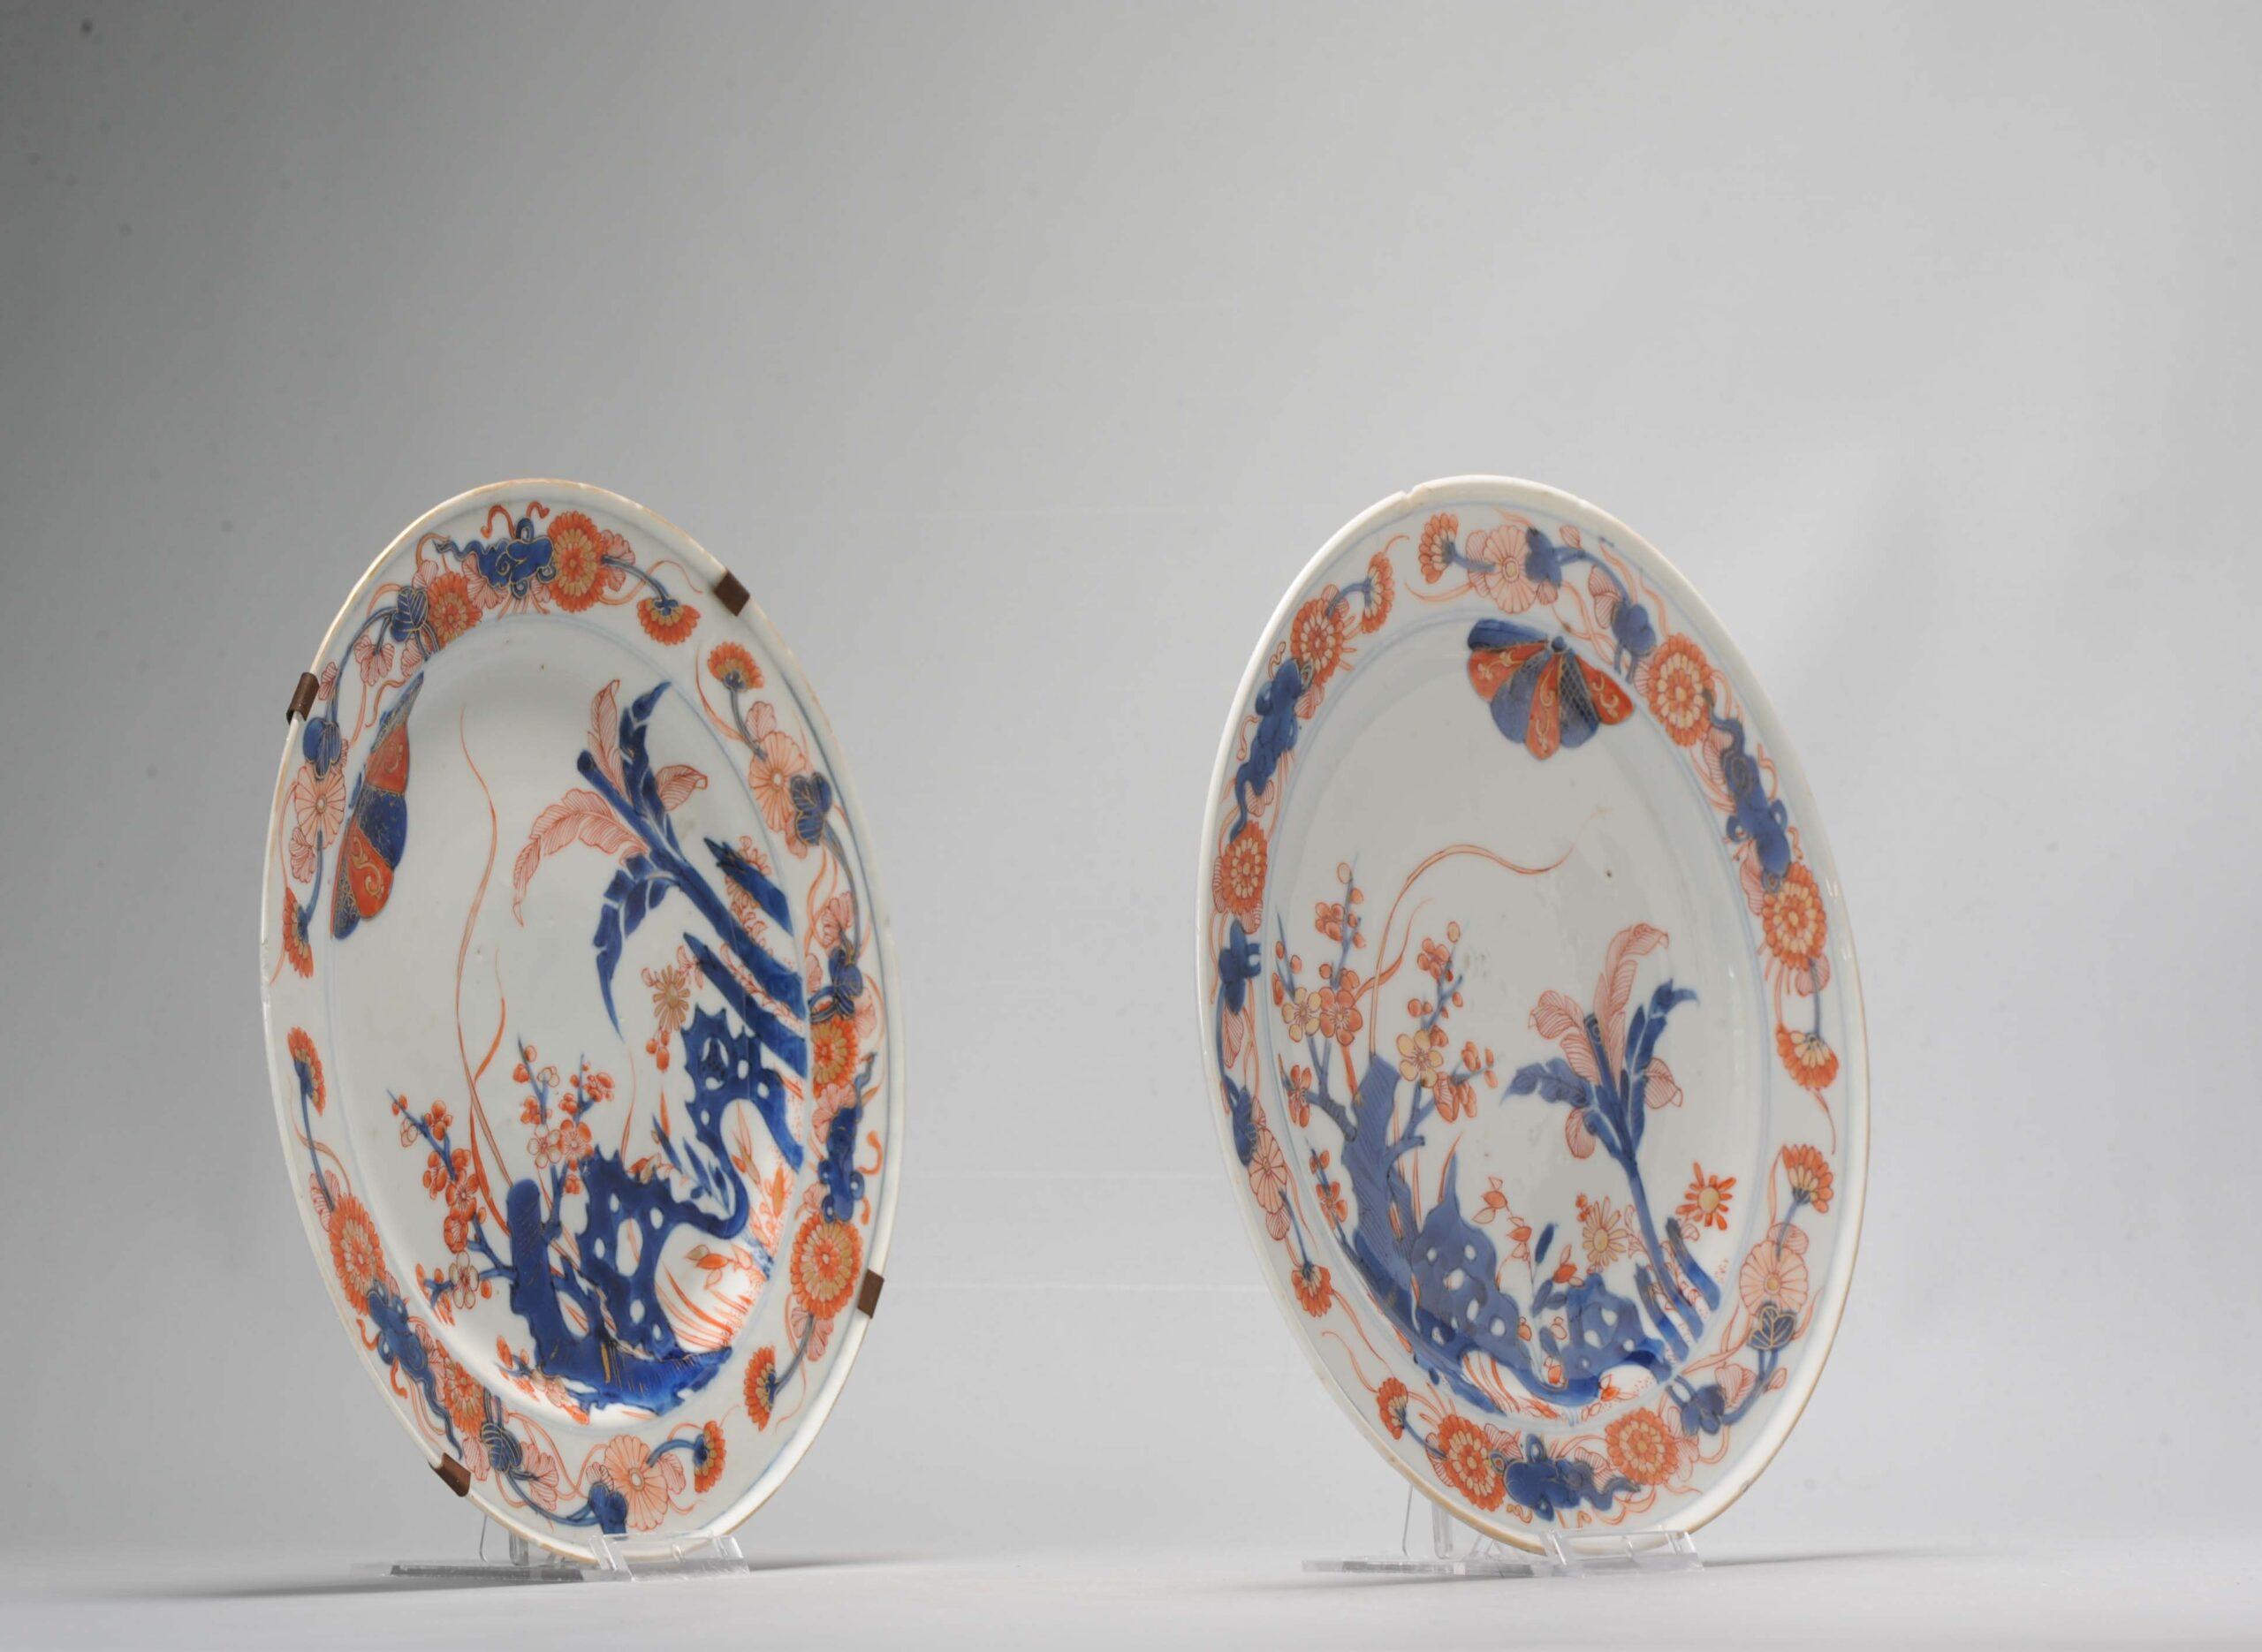 A very nicely decorated and potted Chinese Porcelain plates. Absolutely beautiful pieces. Both with a nice mark at the base, 1 of them below the hanger.

Additional information:
Material: Porcelain & Pottery
Region of Origin: China
Period: 17th